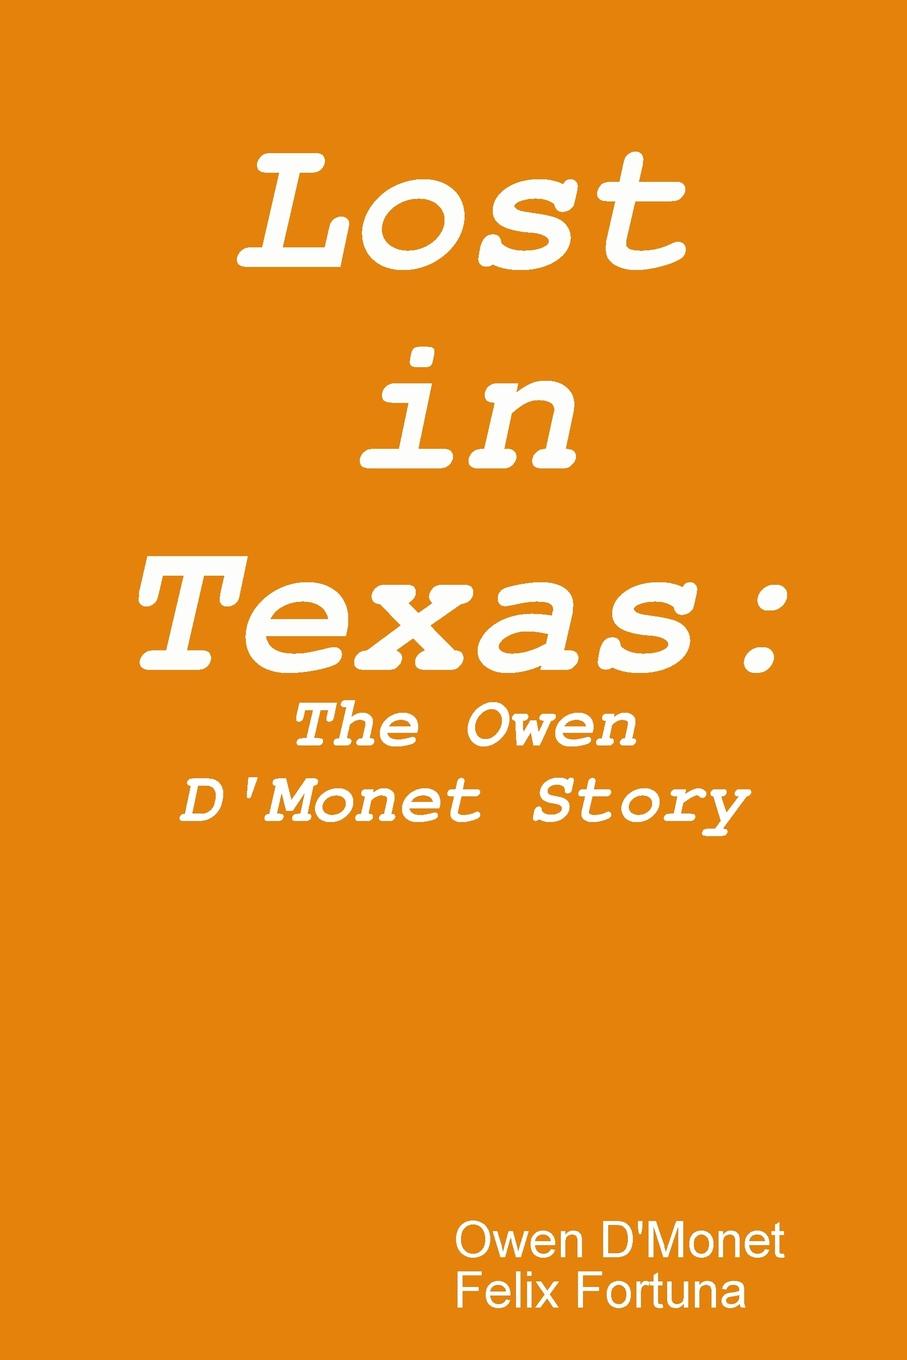 Lost in Texas. The Owen D.Monet Story